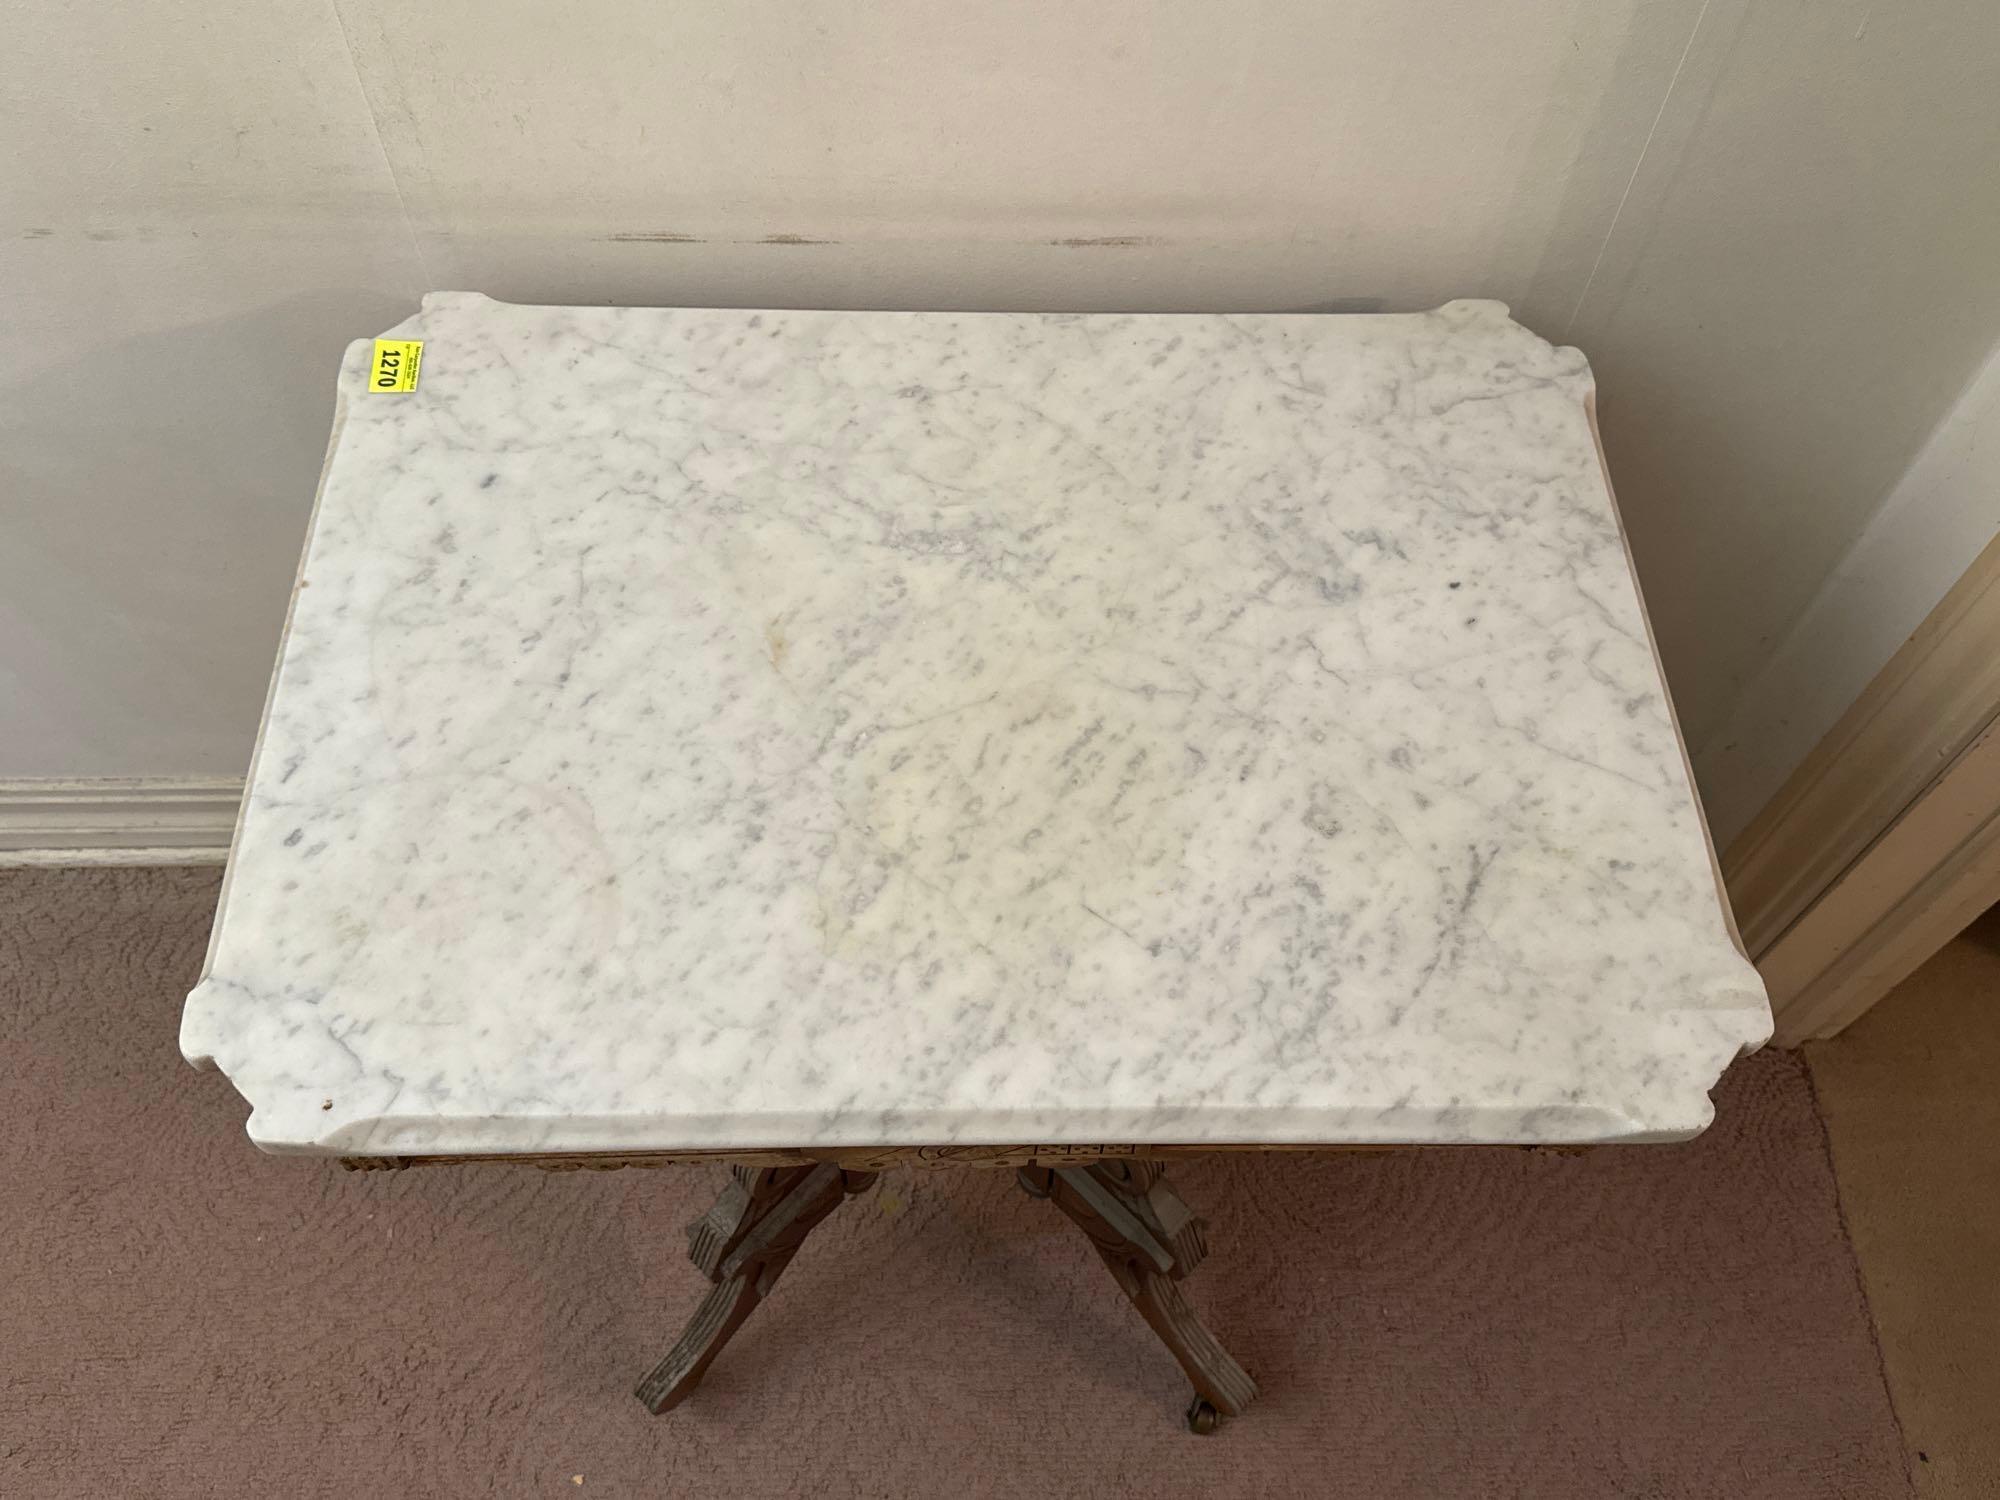 Antique Wood Parlor Table with Marble Top